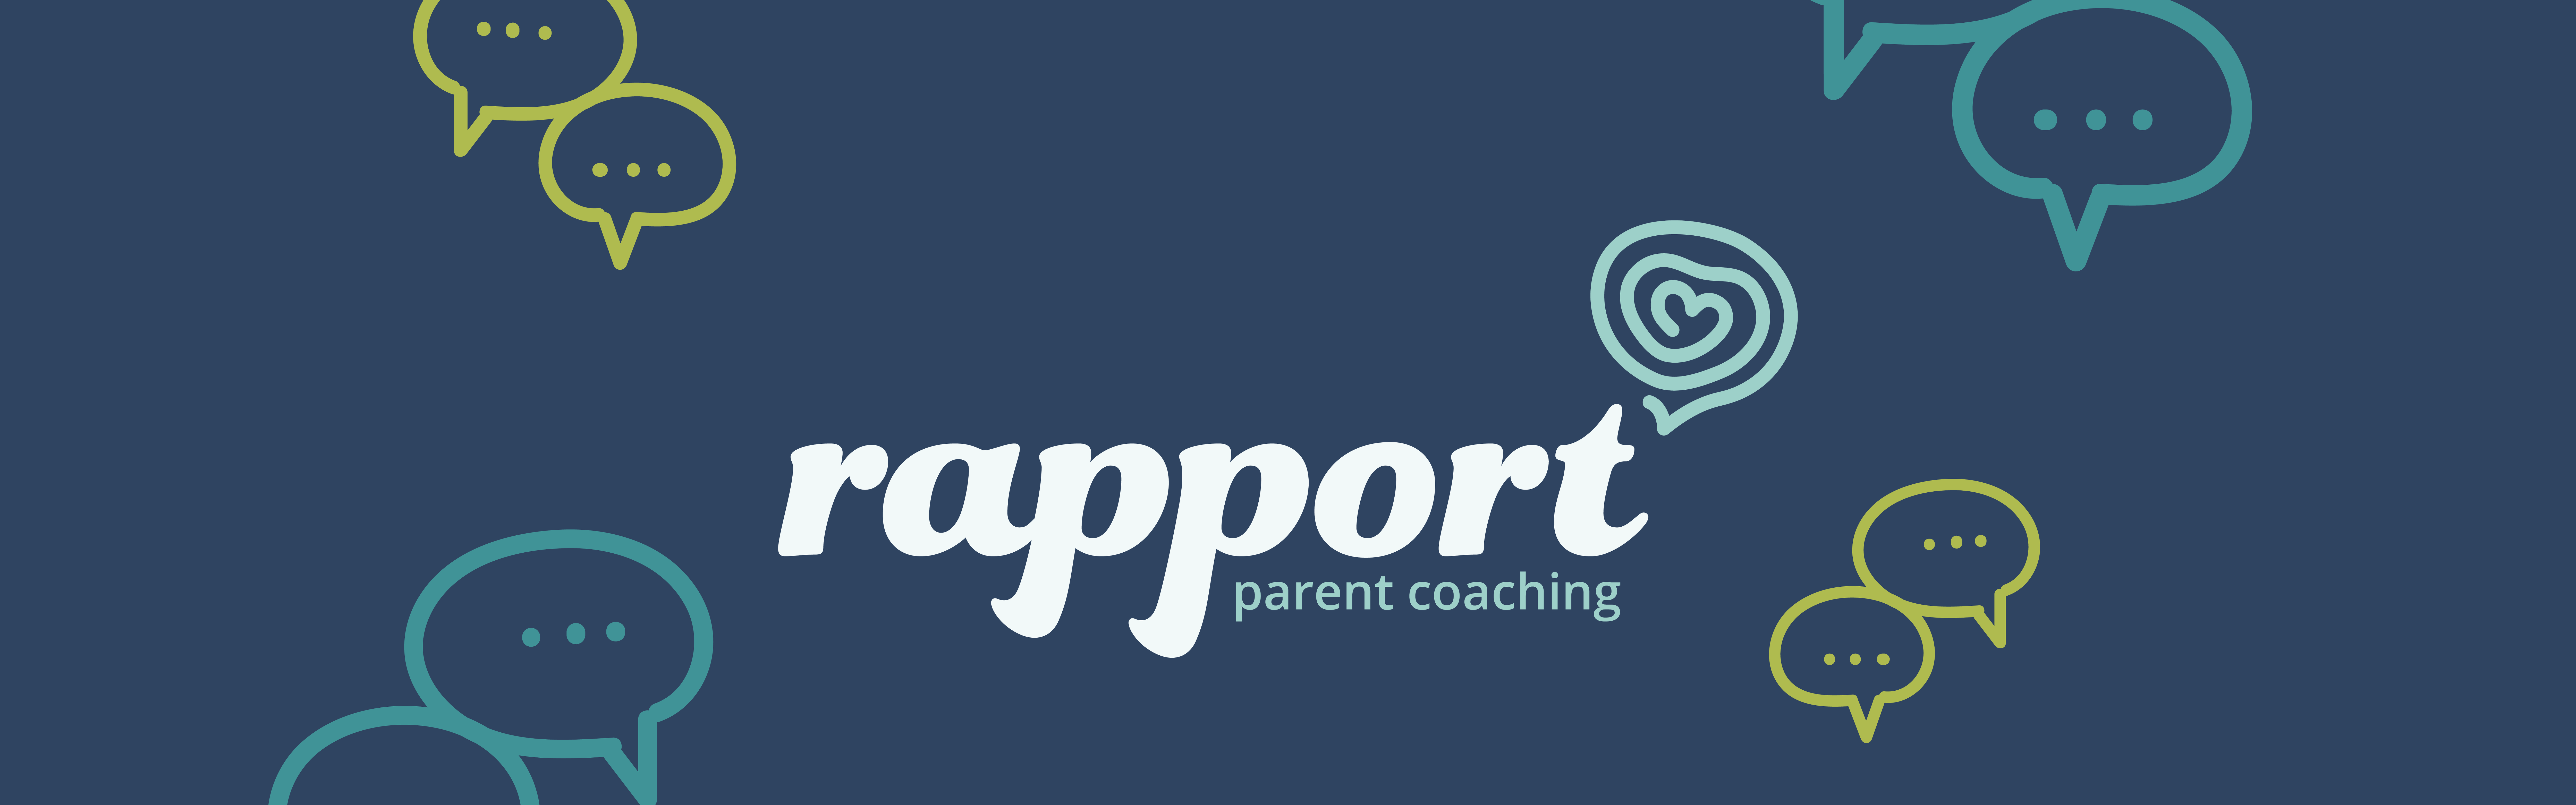 The image is a banner featuring the word "Rapport Parent Coaching" in white lowercase letters, with the background being dark blue and adorned with speech bubble icons.